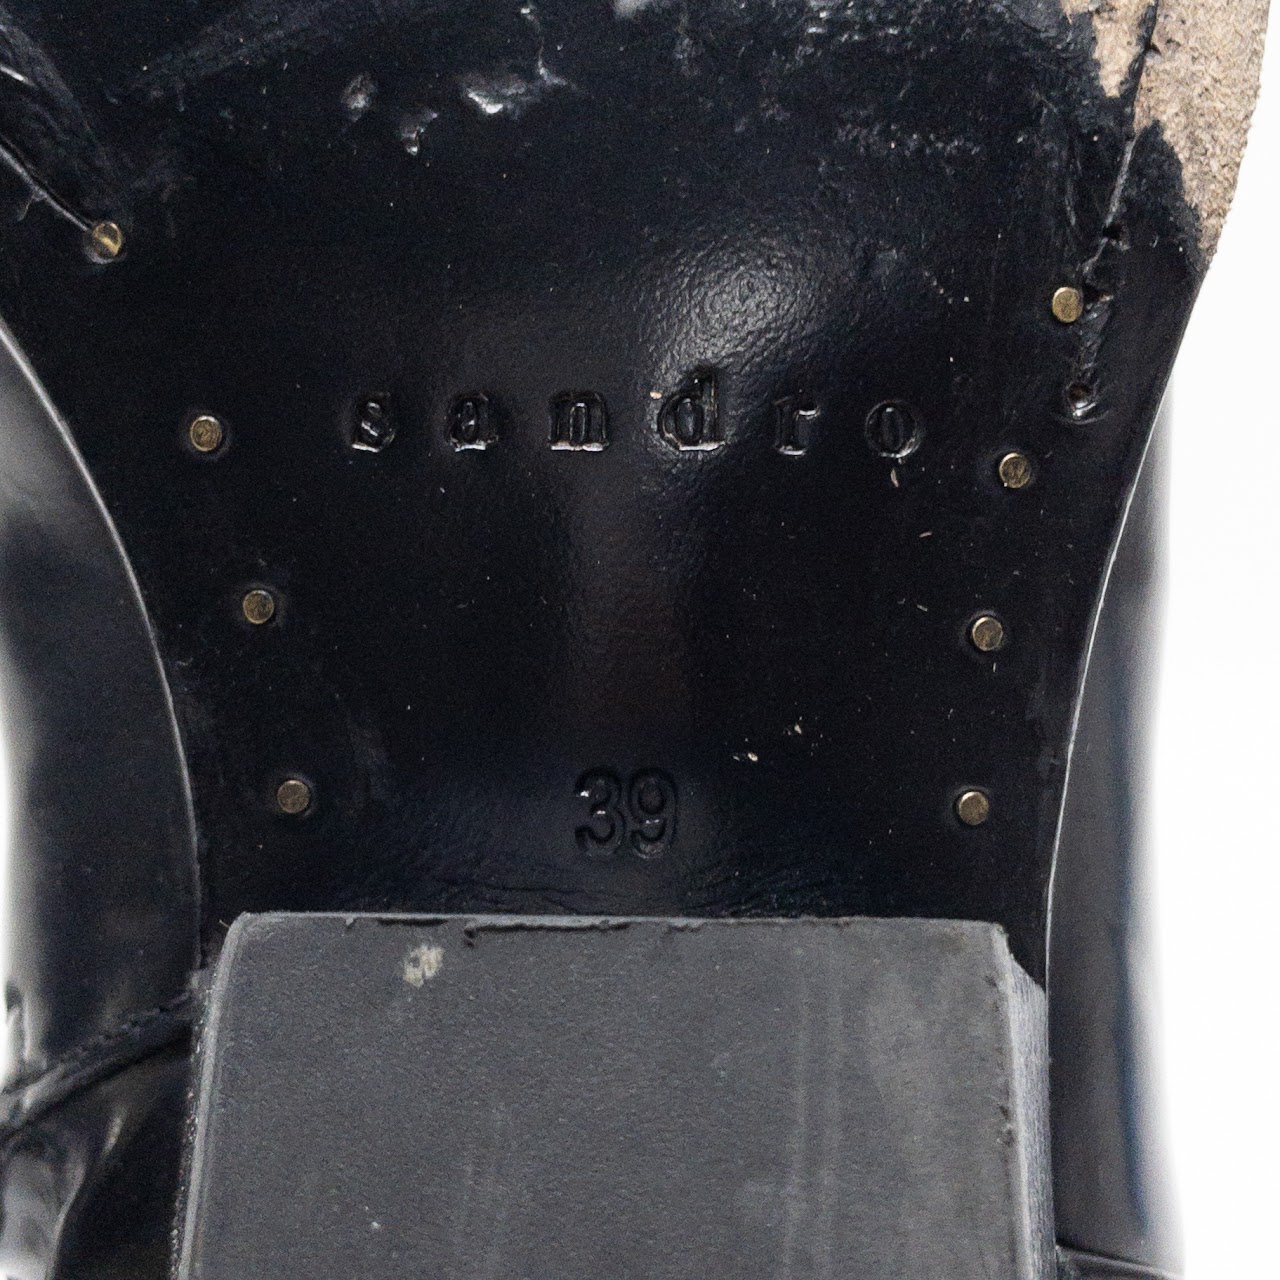 Sandro Embroidered Black Leather Western Boots